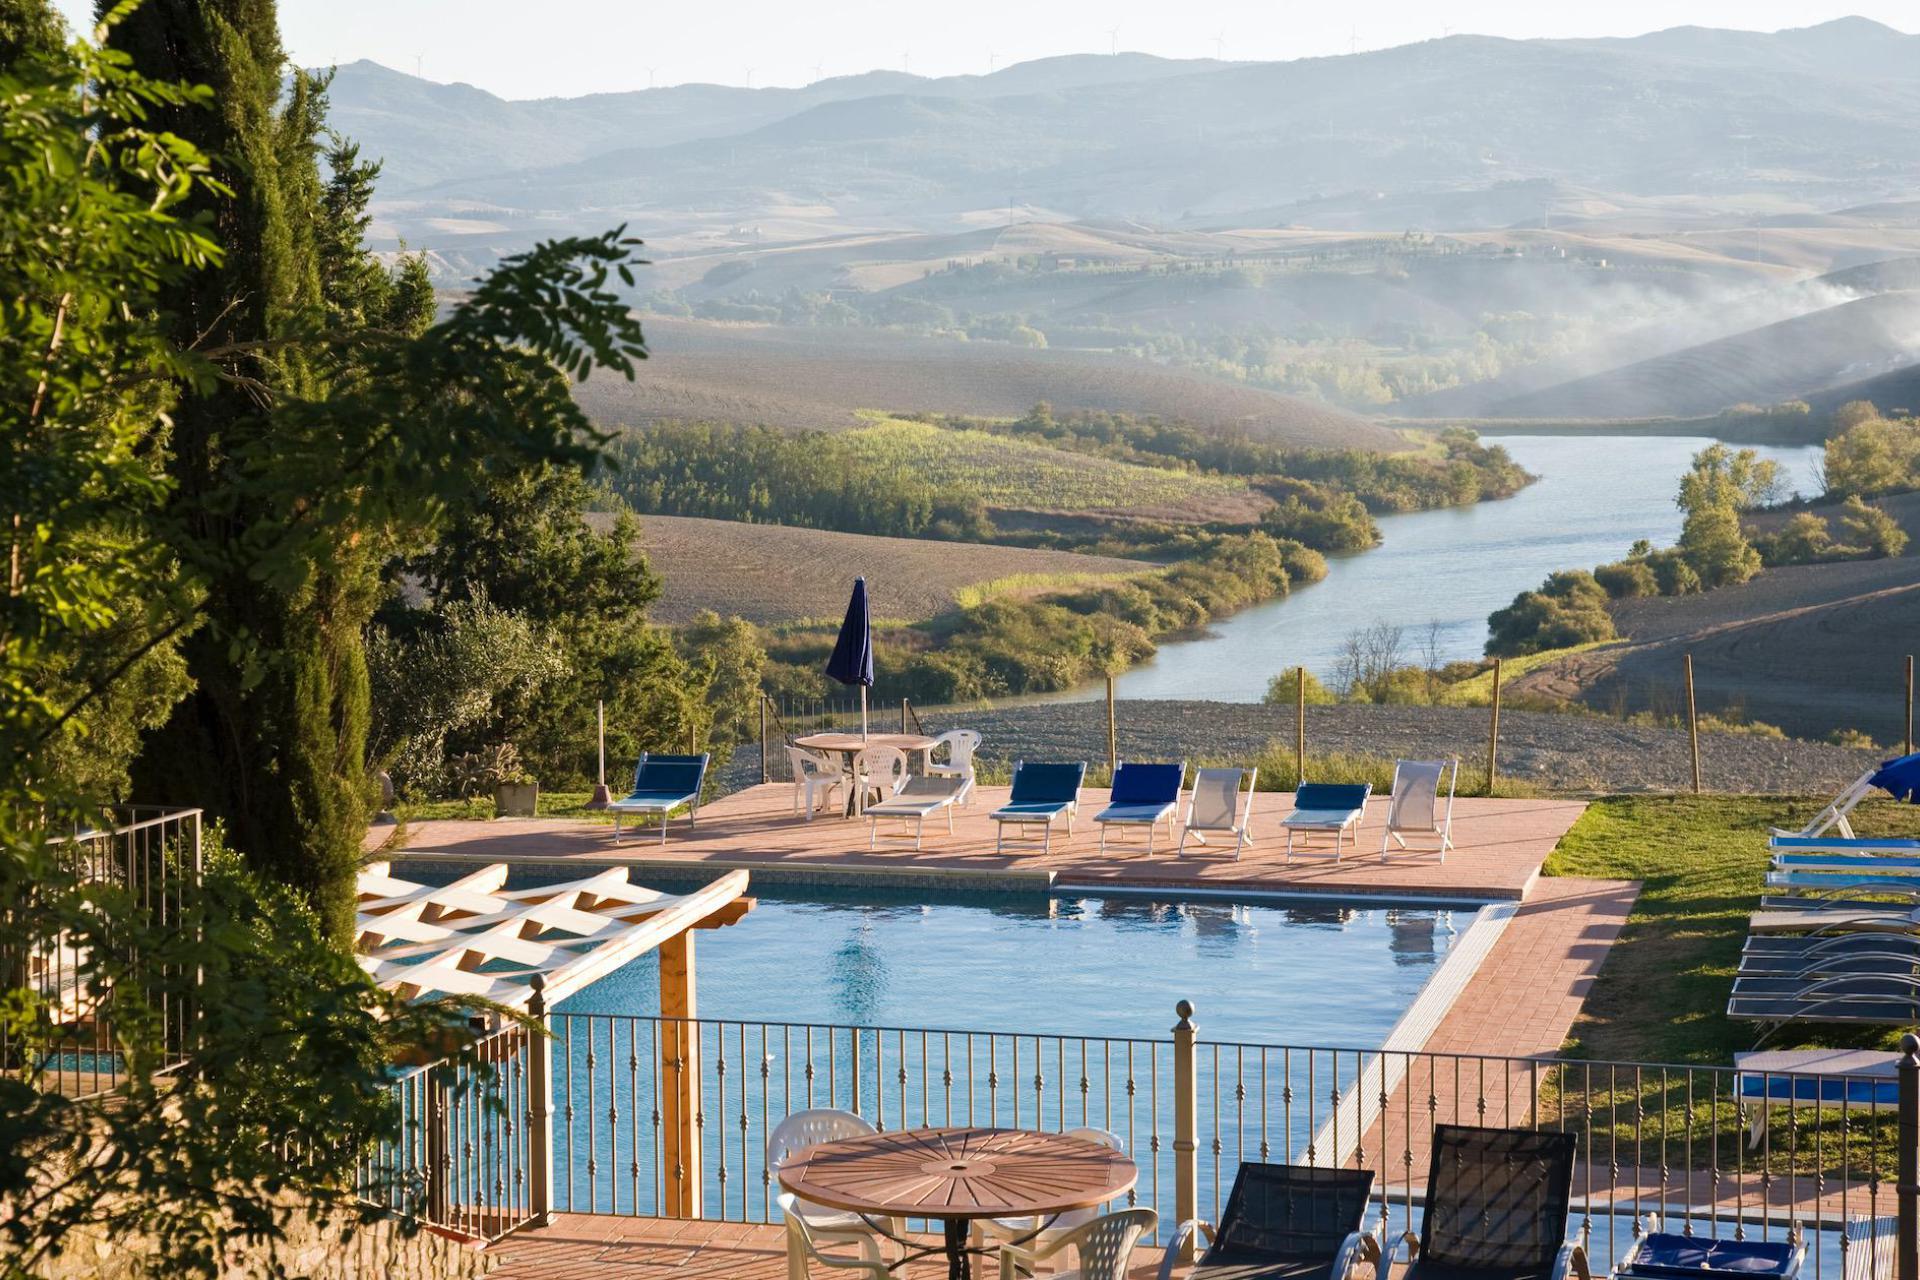 Agriturismo Tuscany, kid friendly and super welcoming!